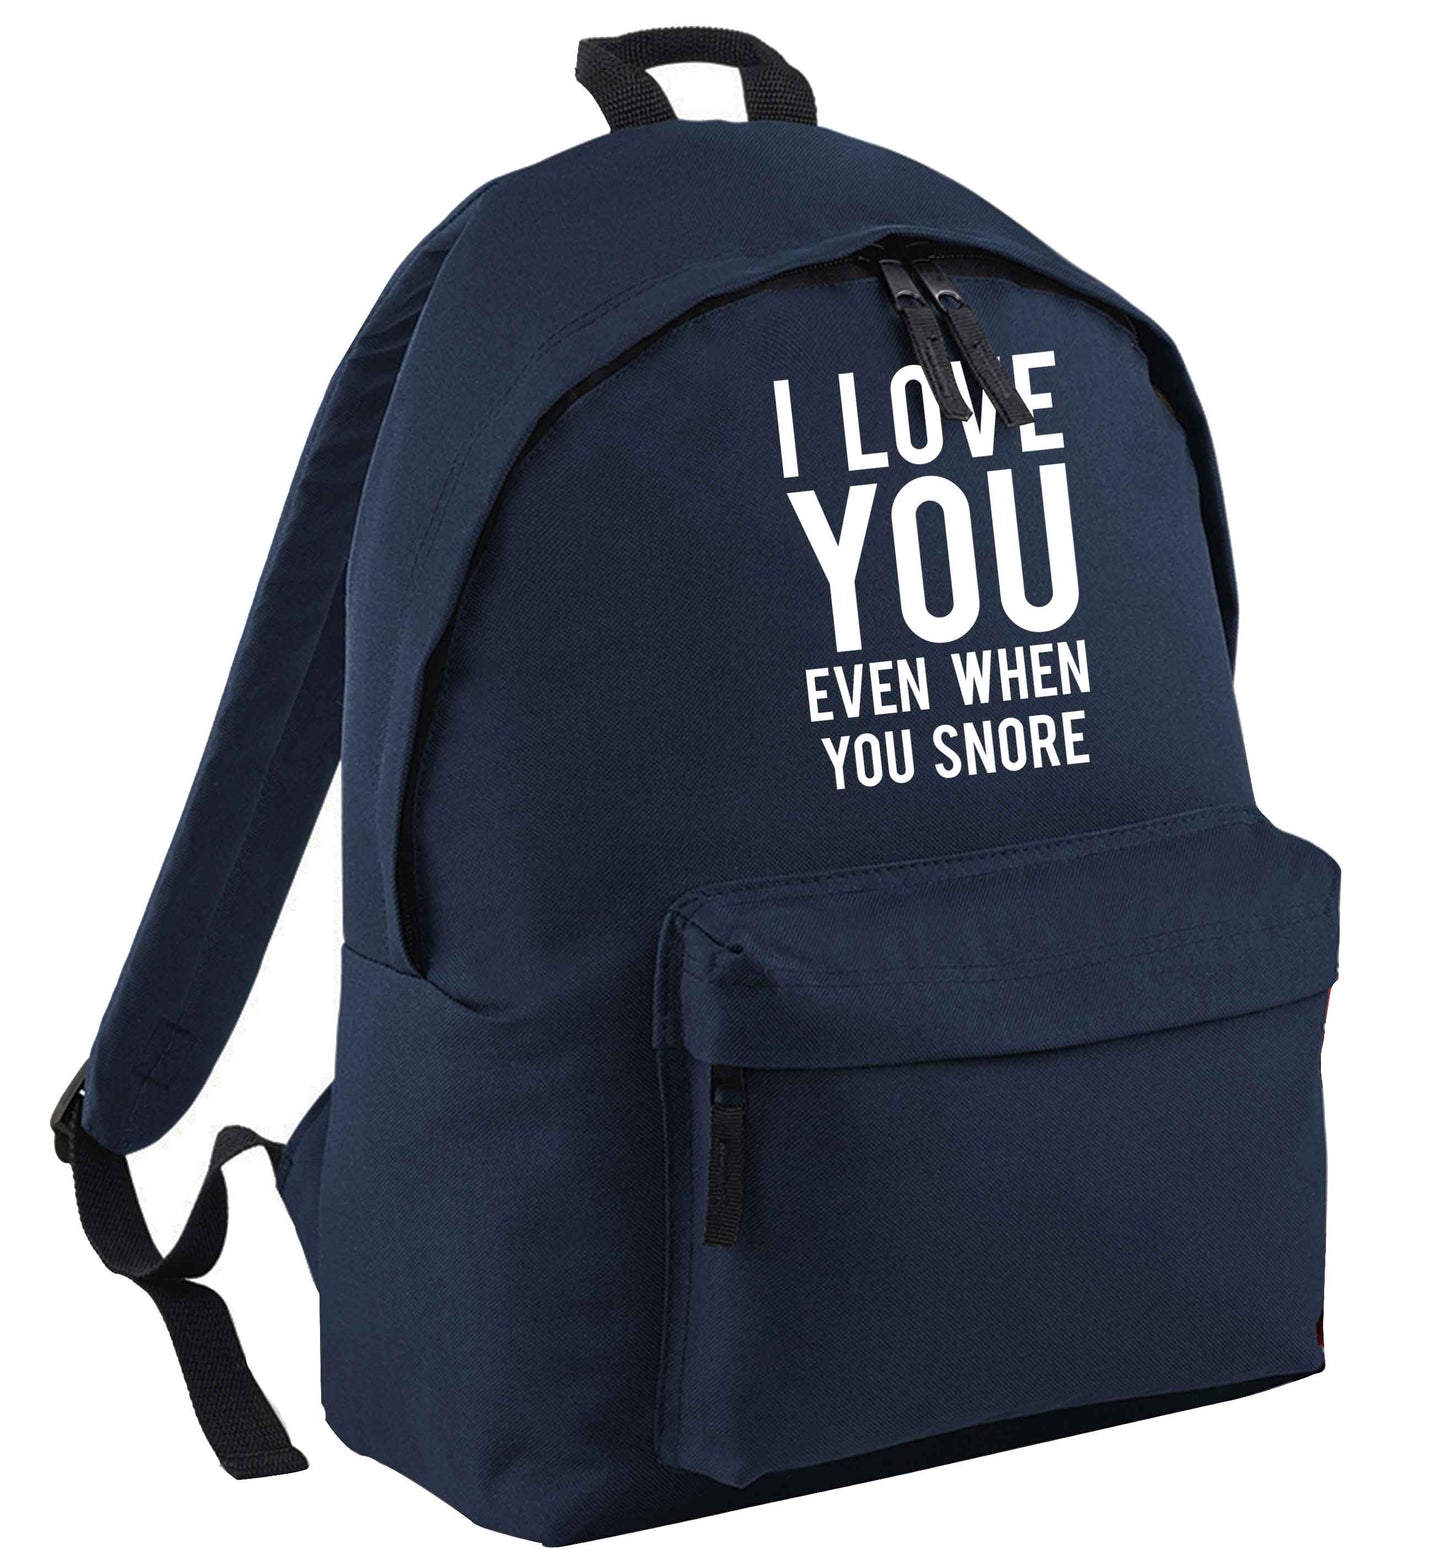 I love you even when you snore | Children's backpack